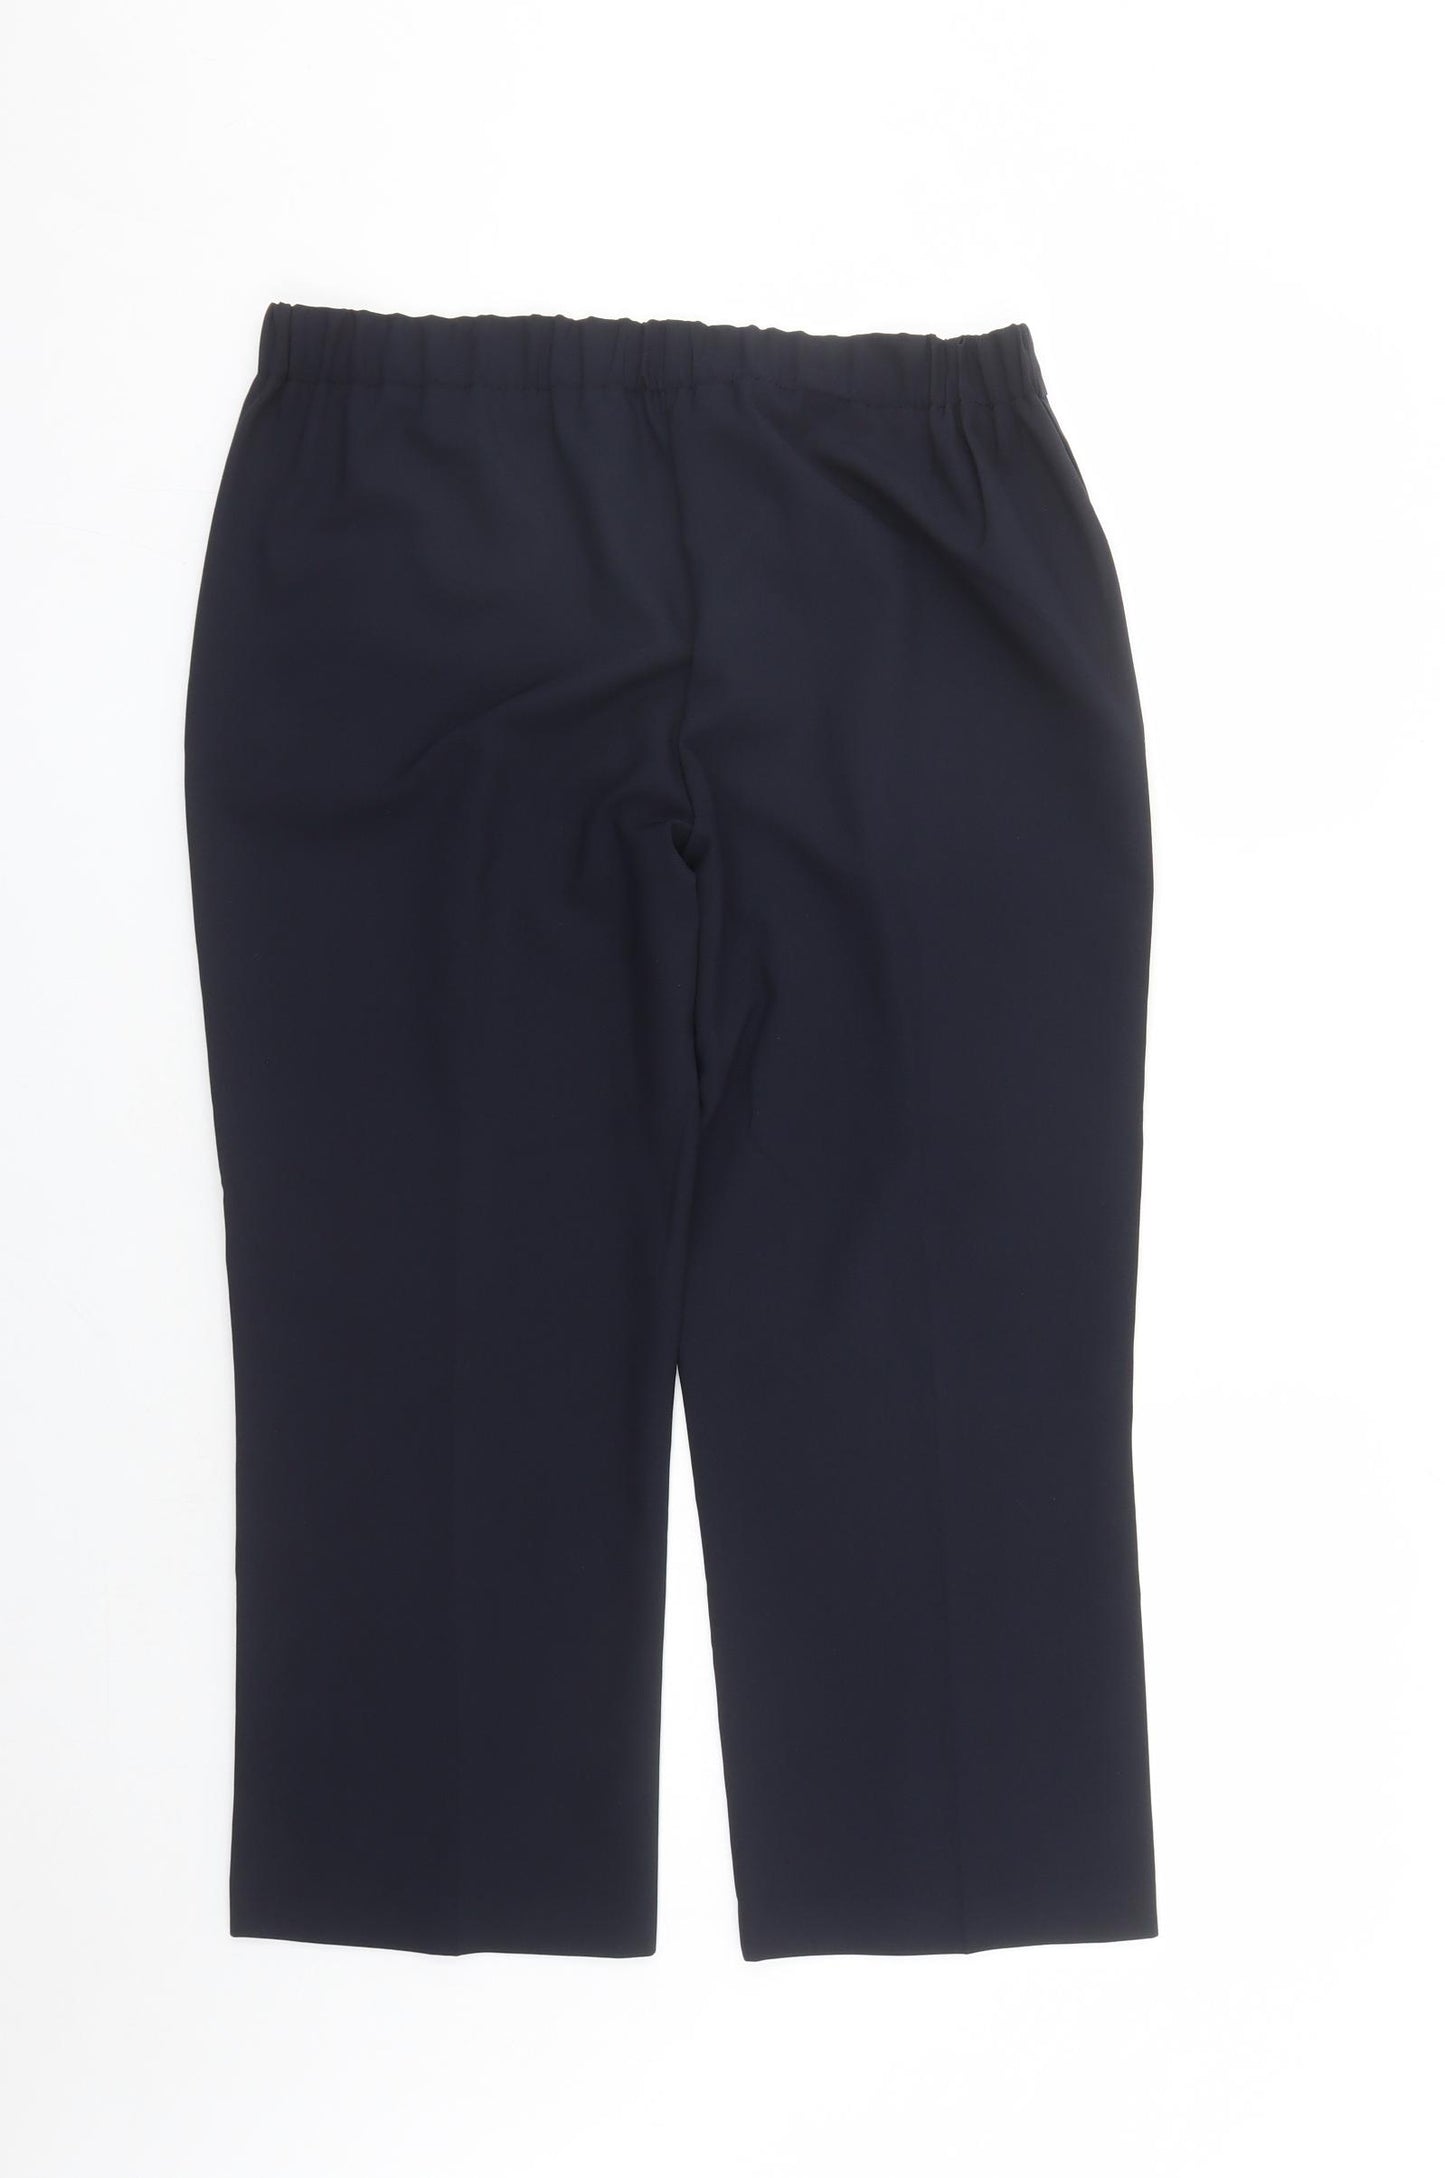 Bonmarché Womens Blue Polyester Trousers Size 14 L24 in Regular - Elasticated Waist